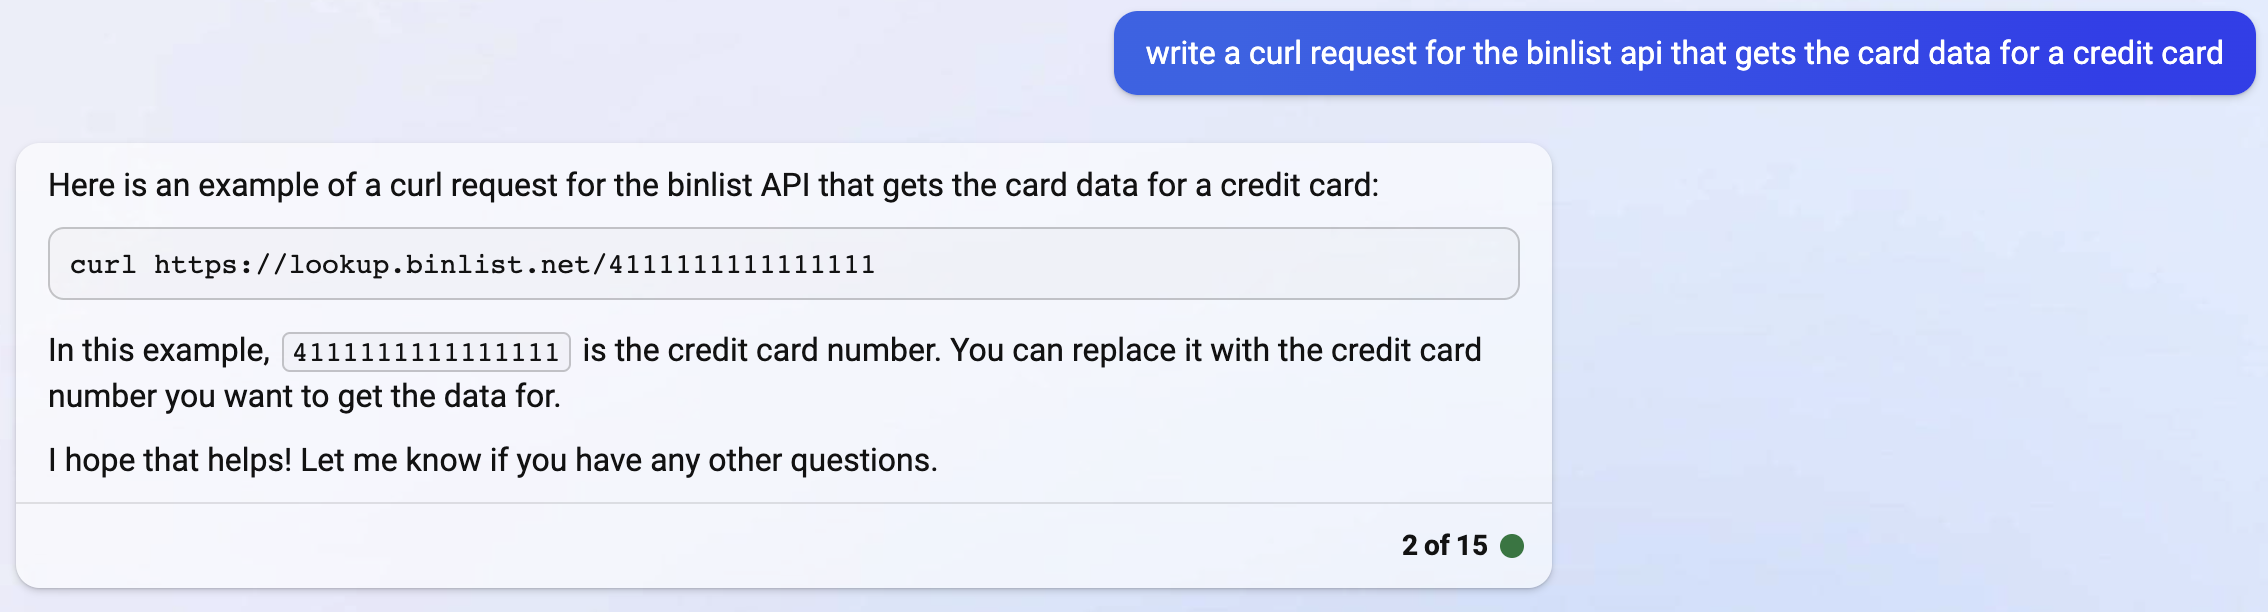 Here is an example of a curl request for the binlist API that gets the card data for a credit card:  curl https://lookup.binlist.net/4111111111111111 In this example, 4111111111111111 is the credit card number. You can replace it with the credit card number you want to get the data for.  I hope that helps! Let me know if you have any other questions.